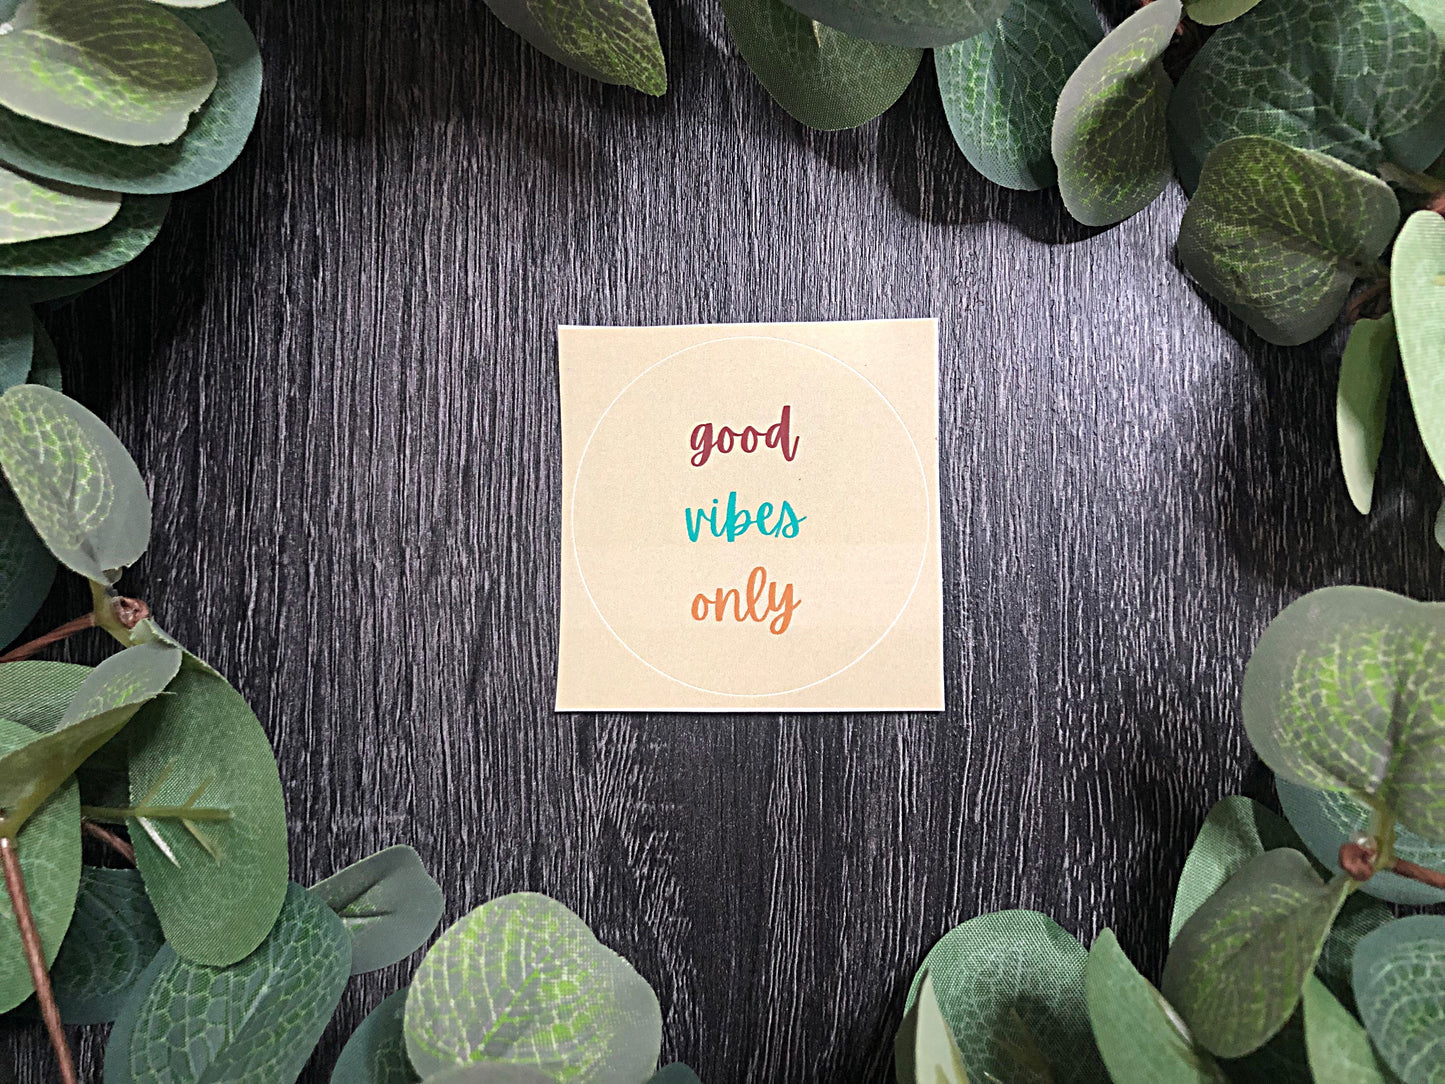 Good Vibes Only Sticker